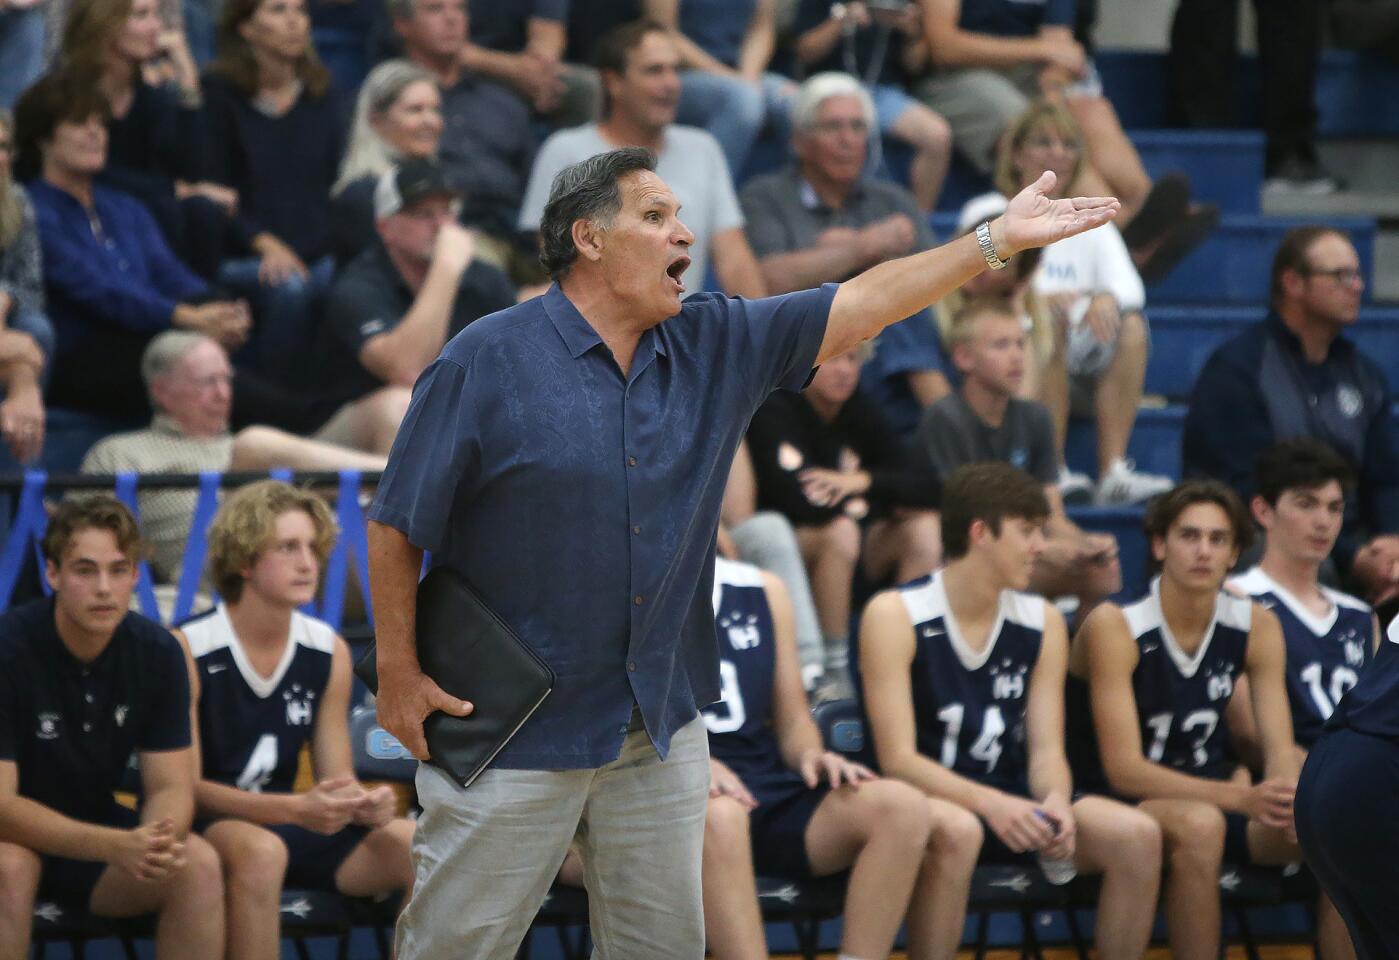 Newport Harbor coach Rocky Ciarelli argues against a call at the net during Battle of the Bay boys' volleyball match in Surf League play on Wednesday.